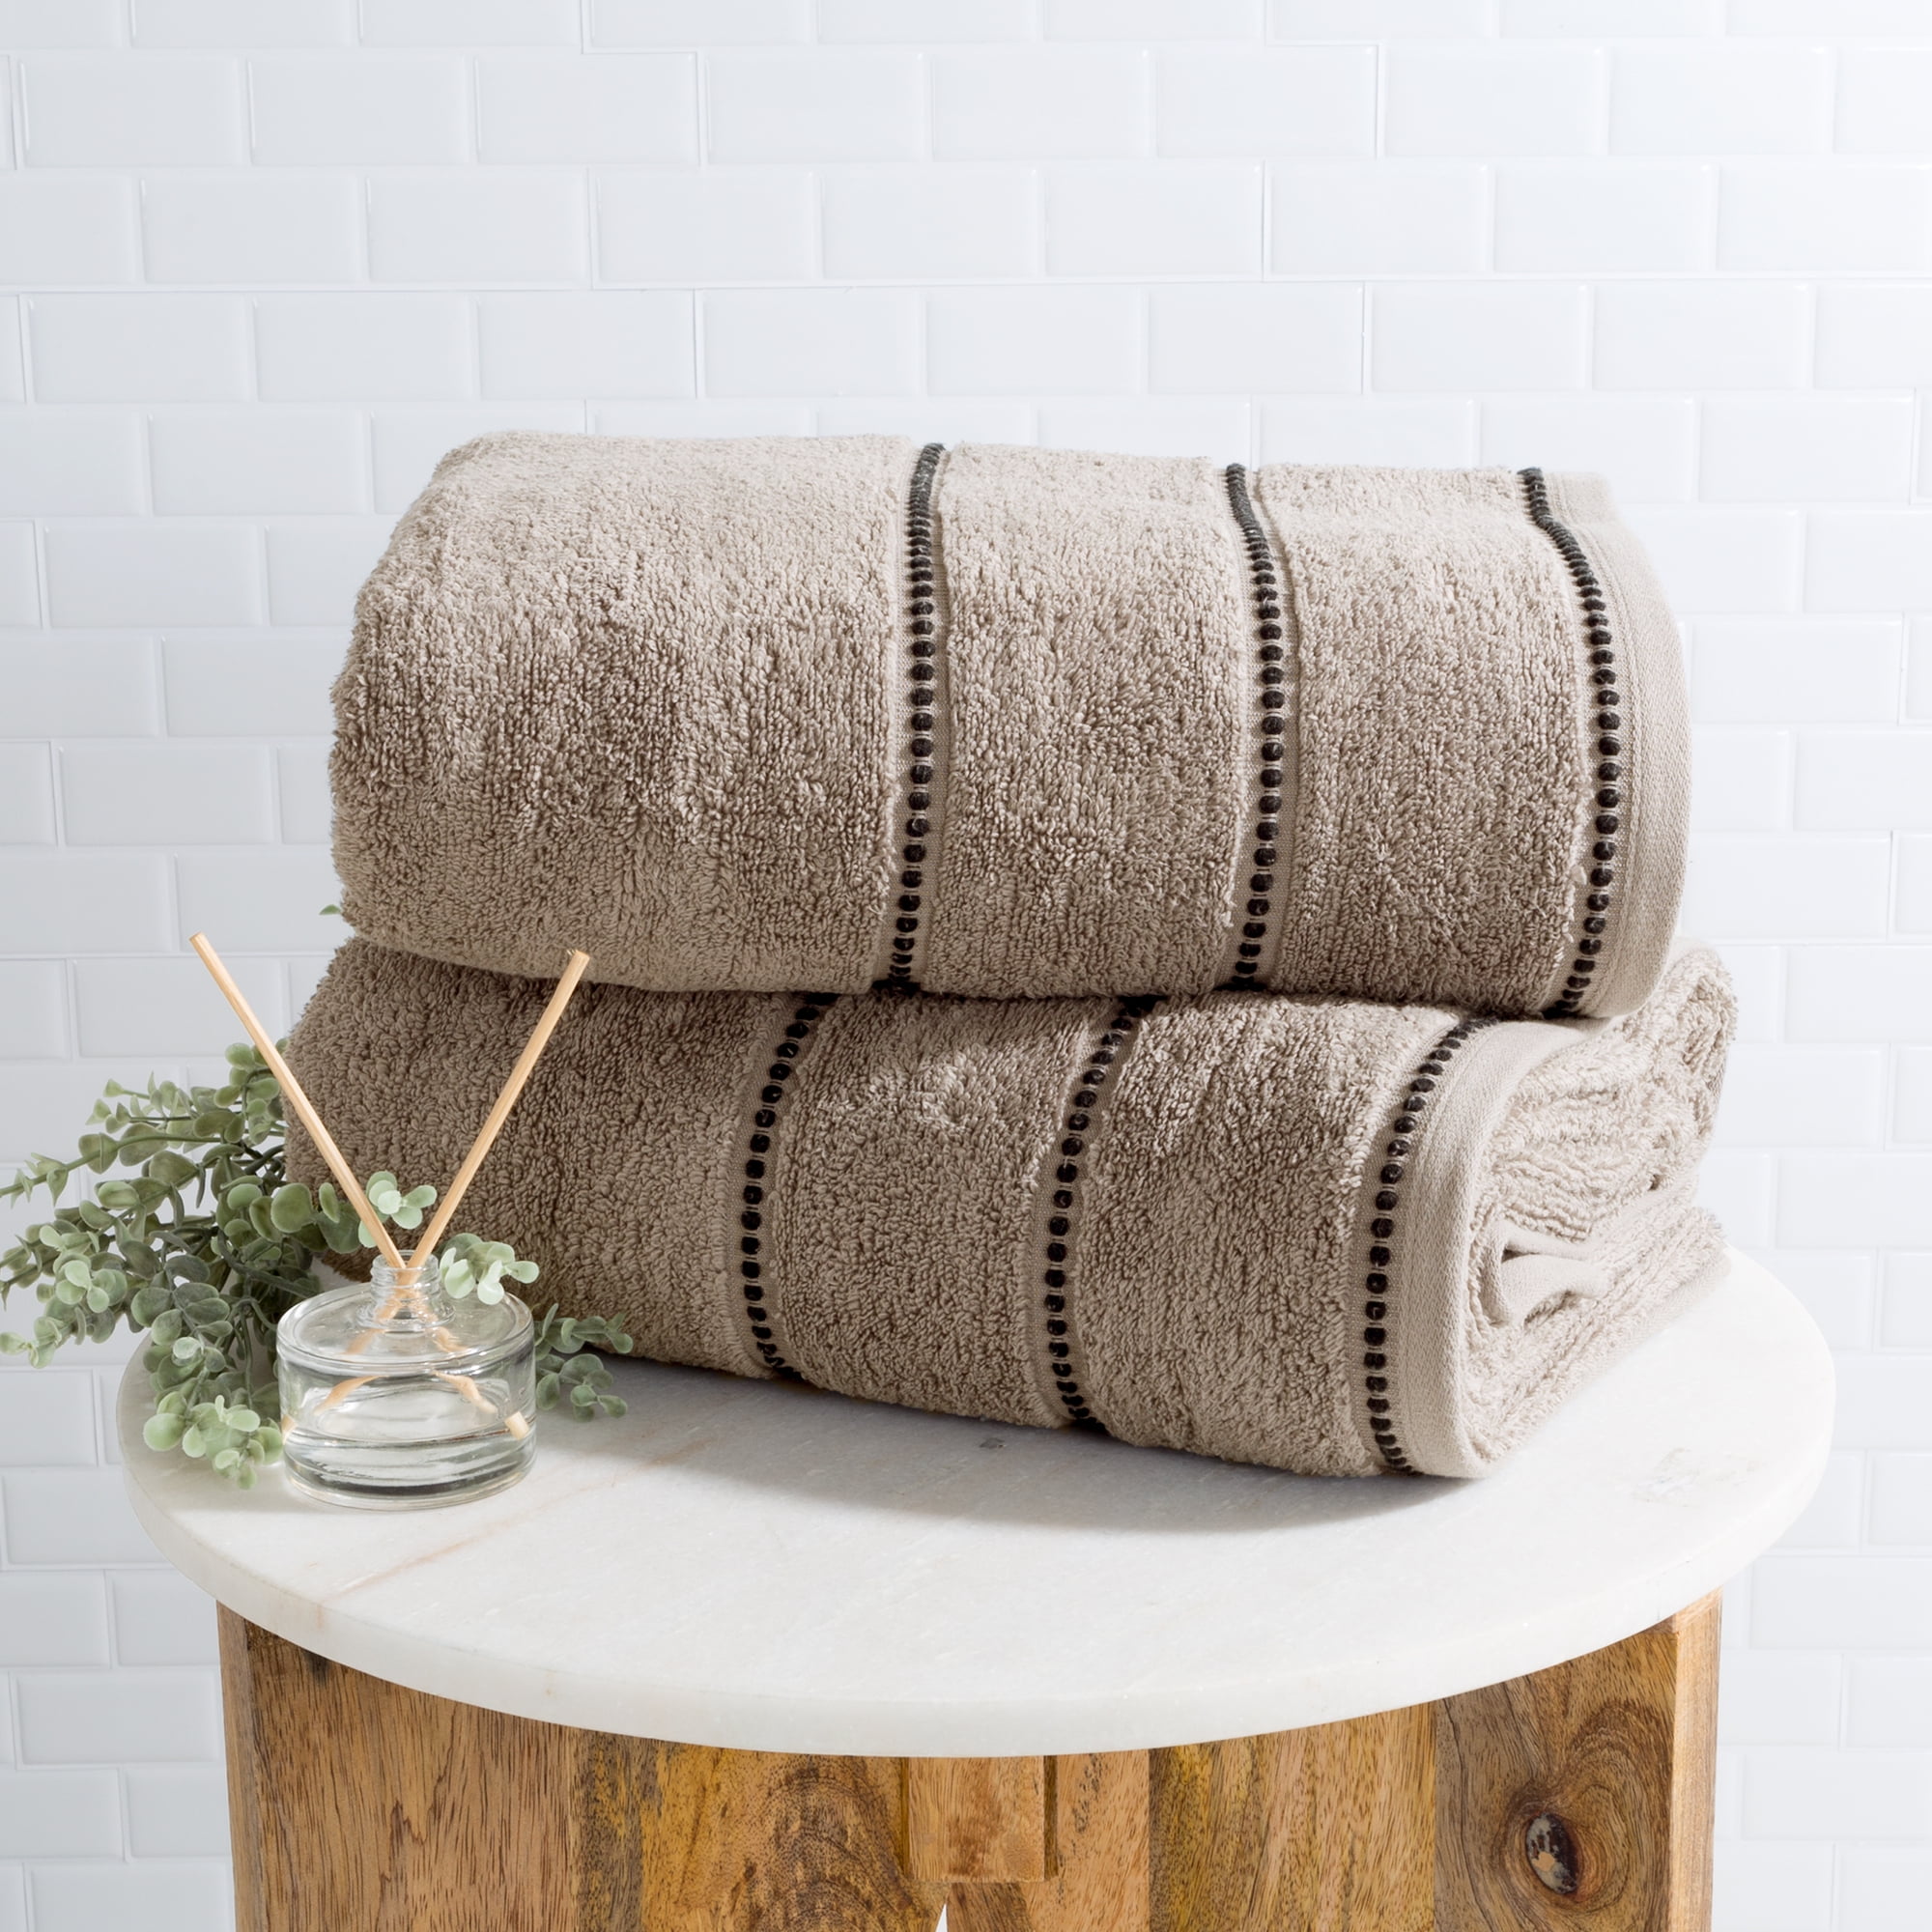 Casa Lino Extra Large Bath Towels (30x60), Set of 2, 100% Pure Cotton, Luxury Bath Towels, Lightweight & Highly Absorbent, Quick Drying Towels for